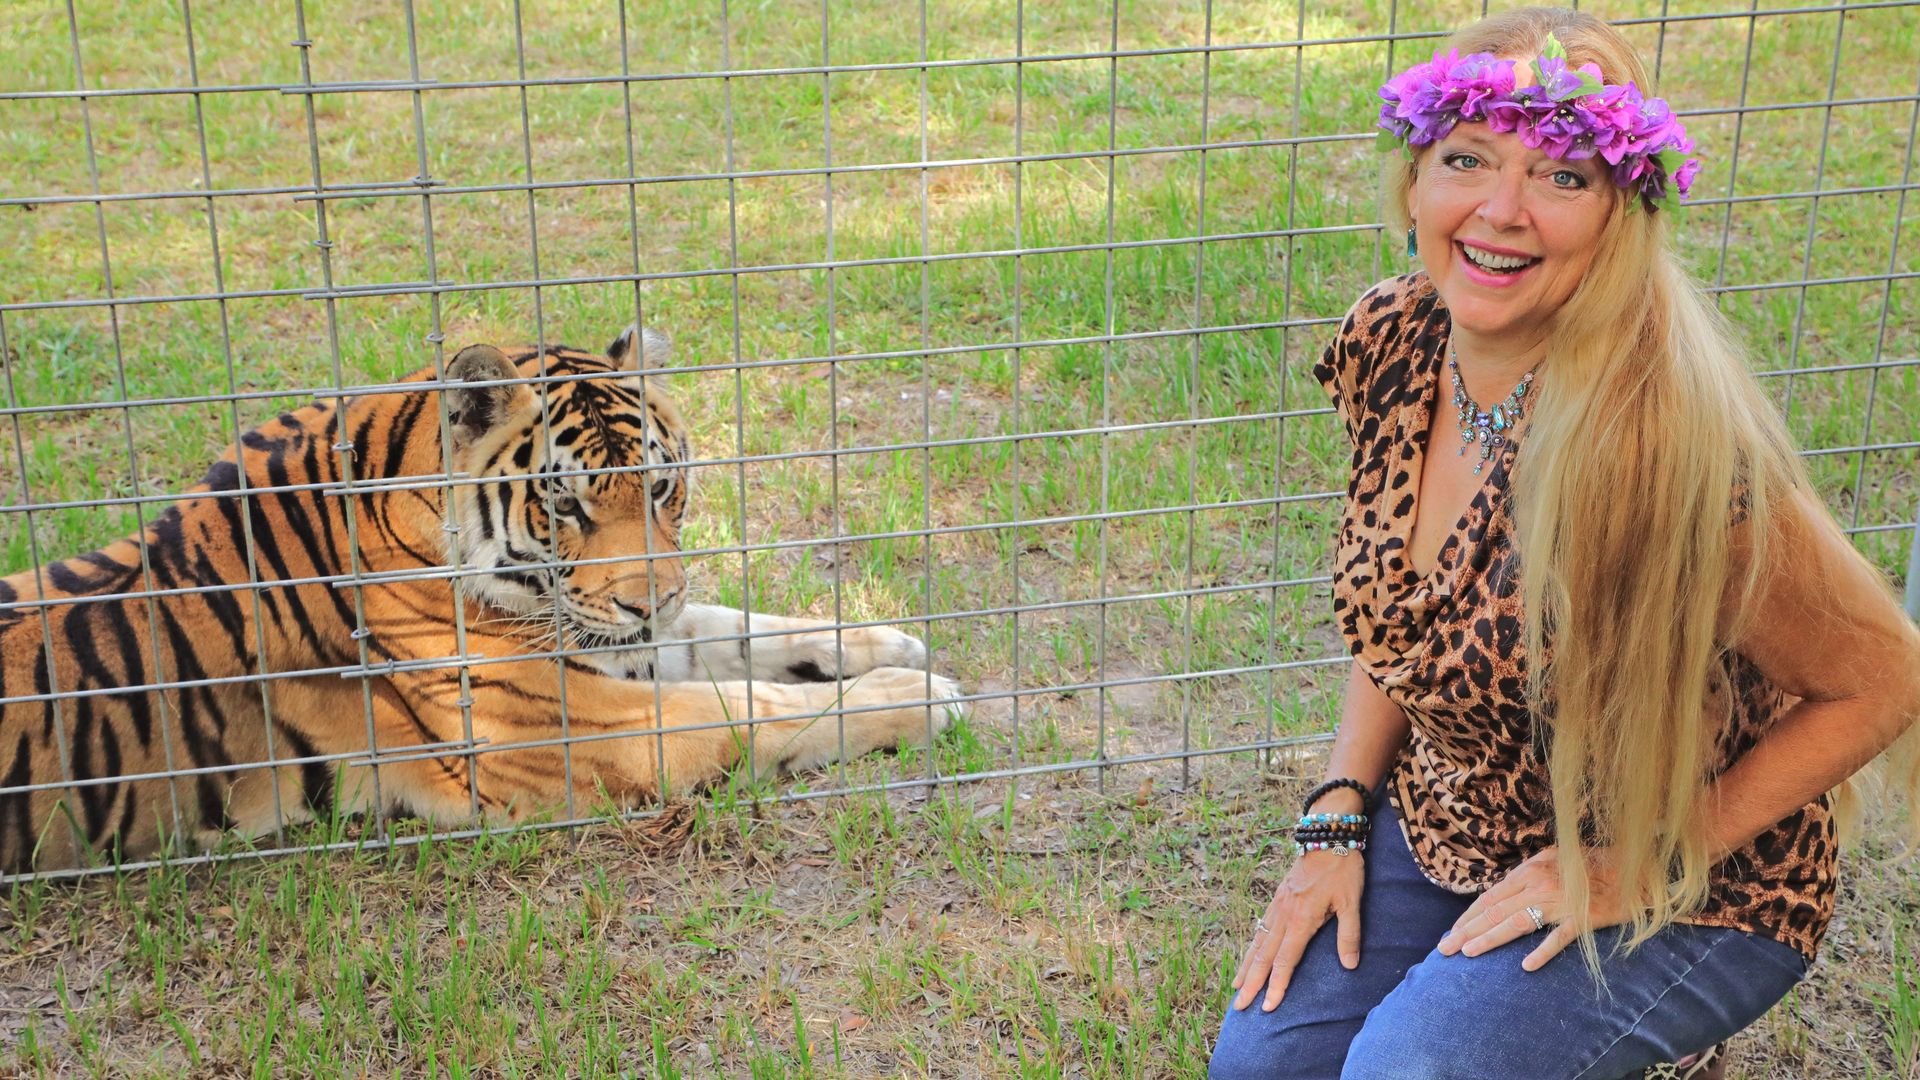 Carole Baskin wearing a cheetah print shirt and a purple flower crown posing next to a tiger behind a wire fence